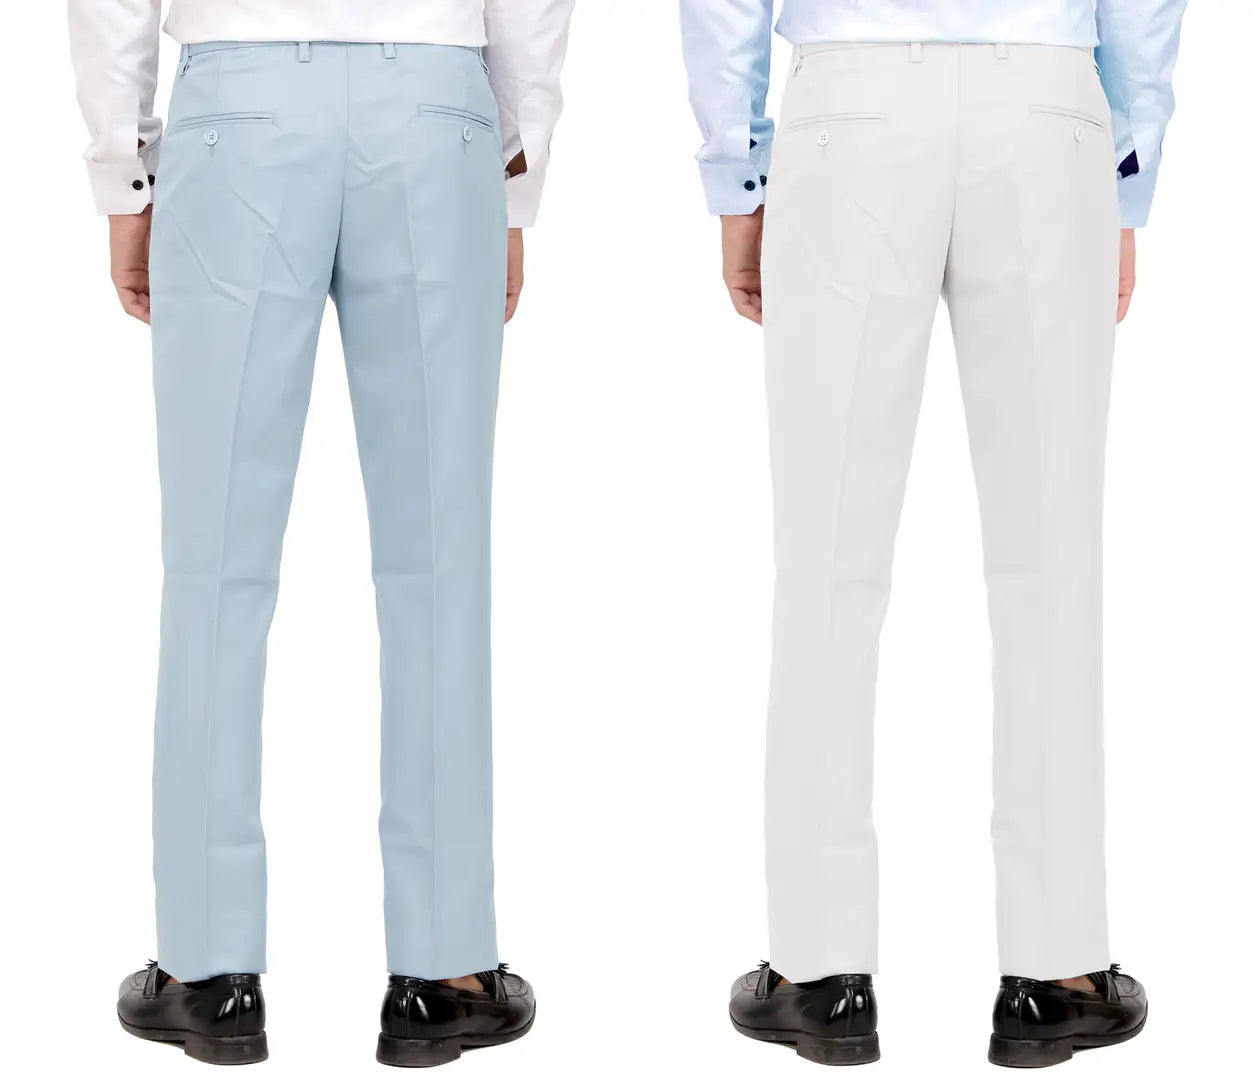 Kundan Men Poly-Viscose Blended Light Sky Blue and White Formal Trousers ( Pack of 2 Trousers )